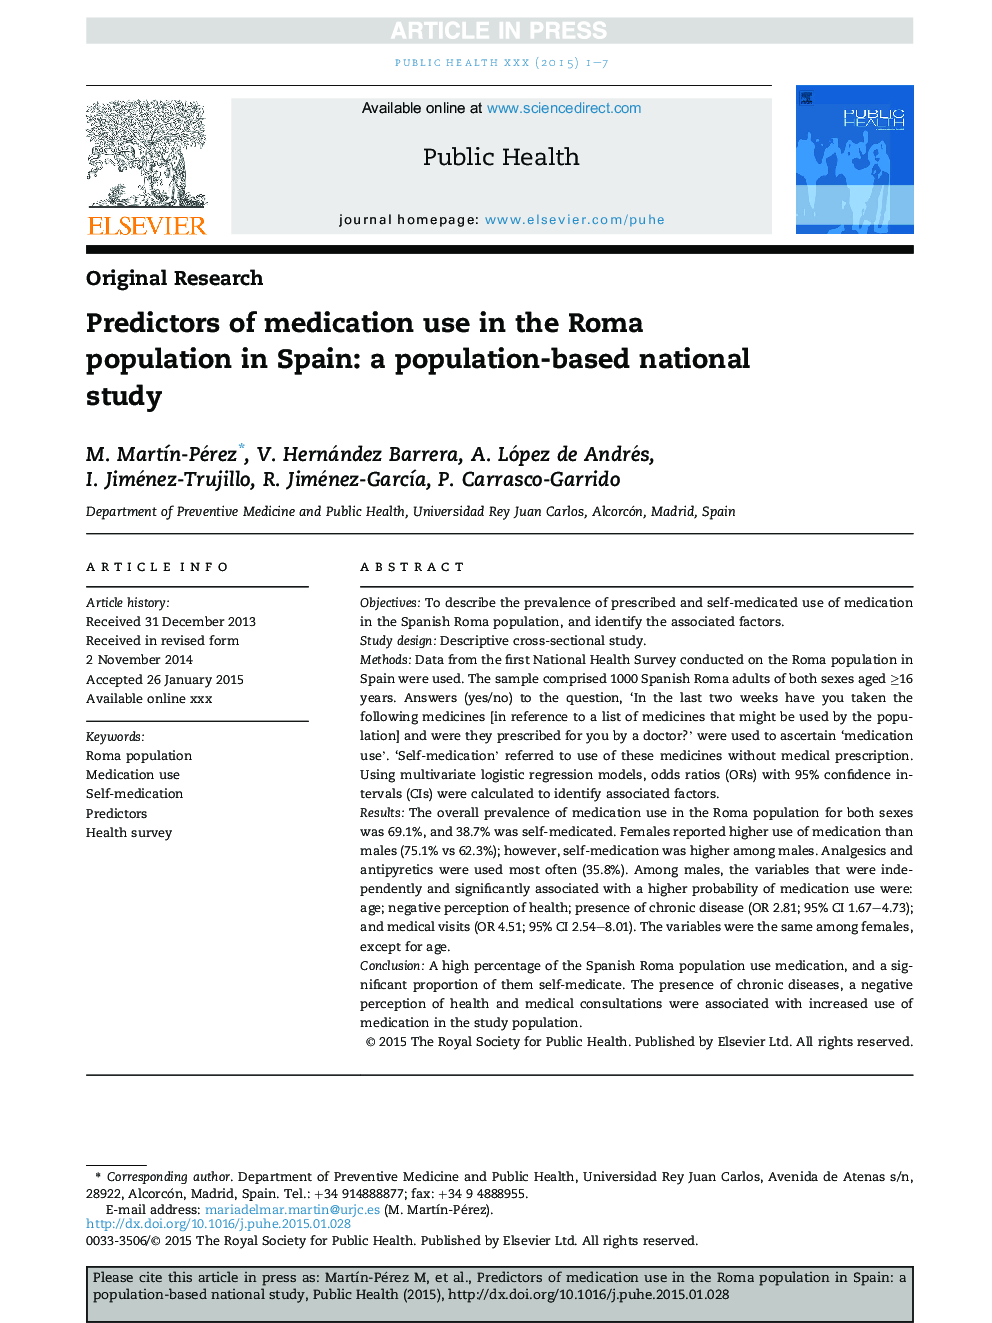 Predictors of medication use in the Roma population in Spain: a population-based national study